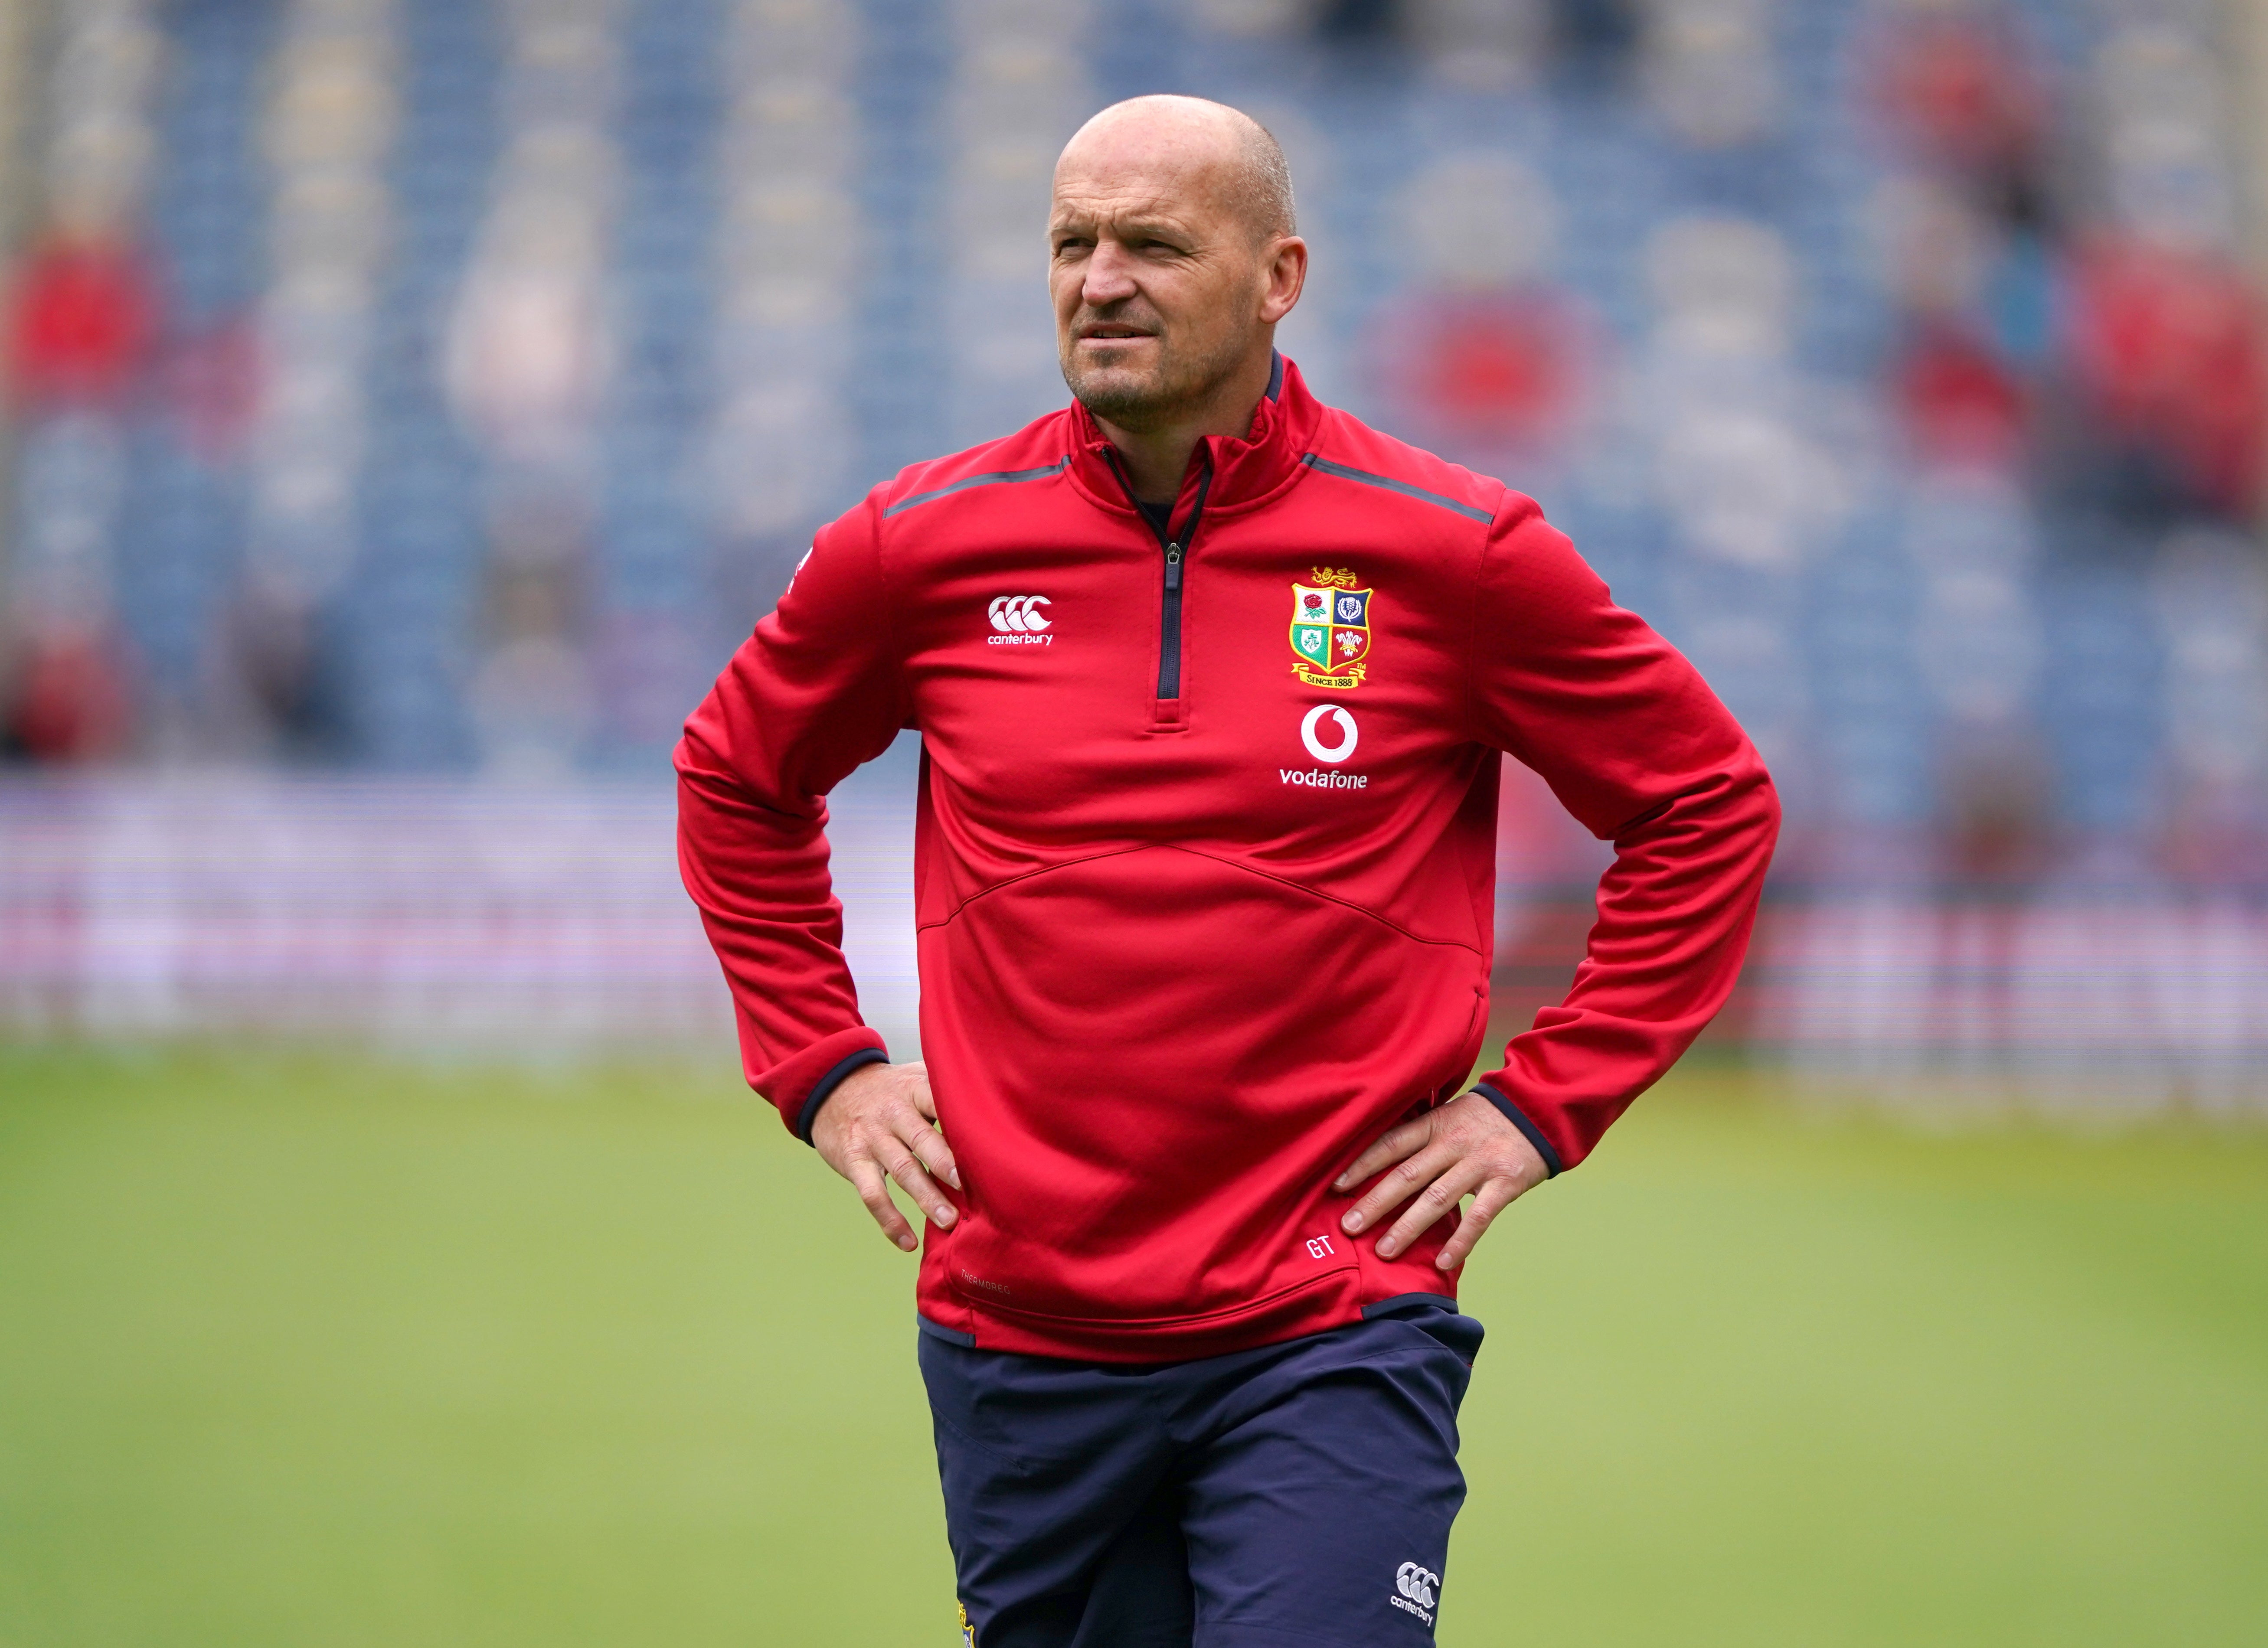 Gregor Townsend says there is more to come from the Lions’ attack (Andrew Milligan/PA)